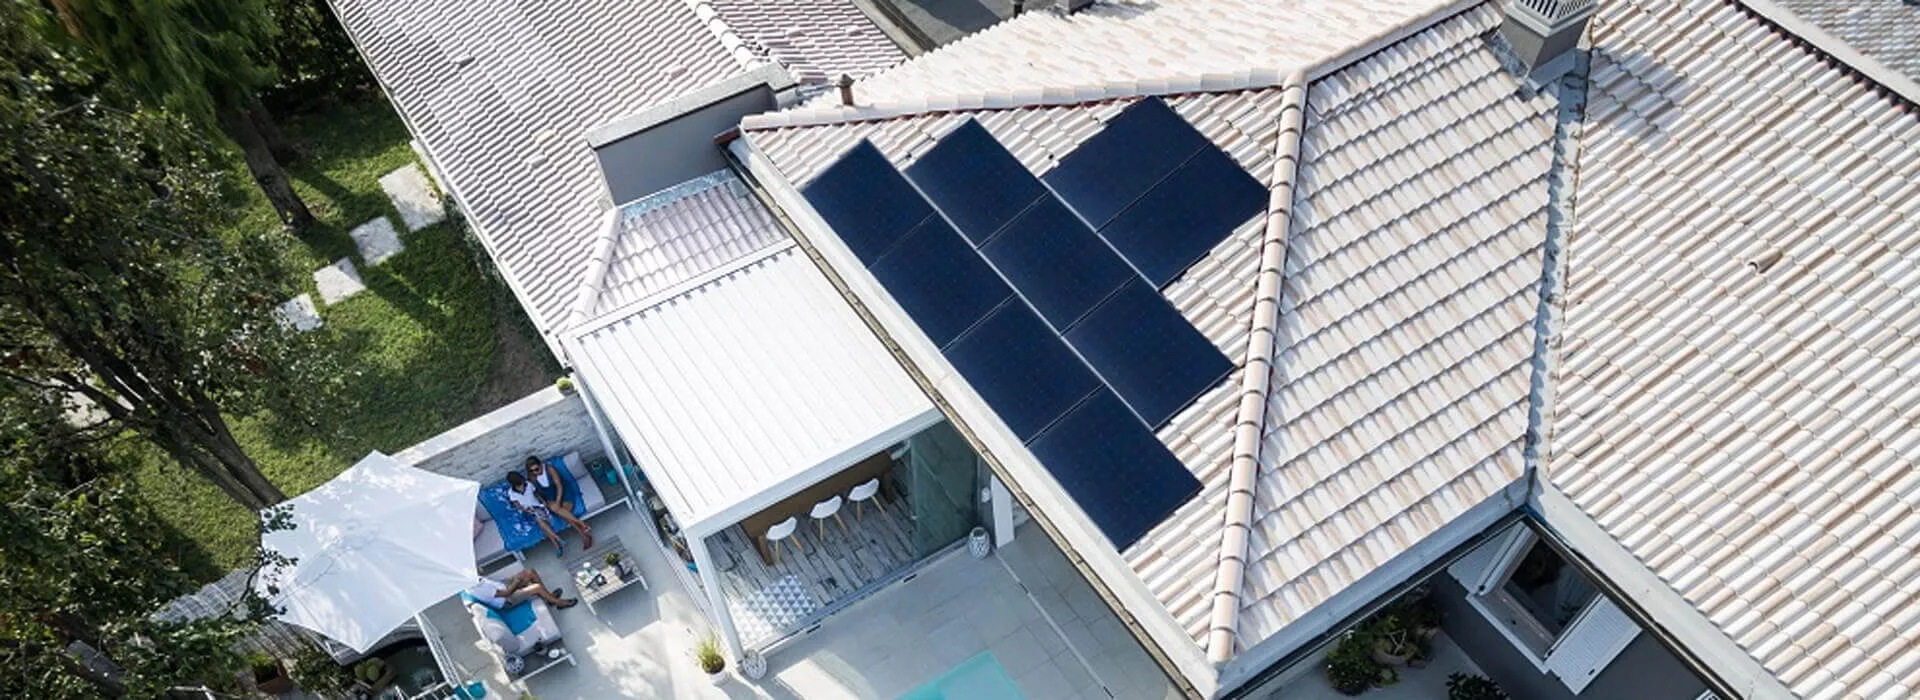 view of rooftop solar panels on a home